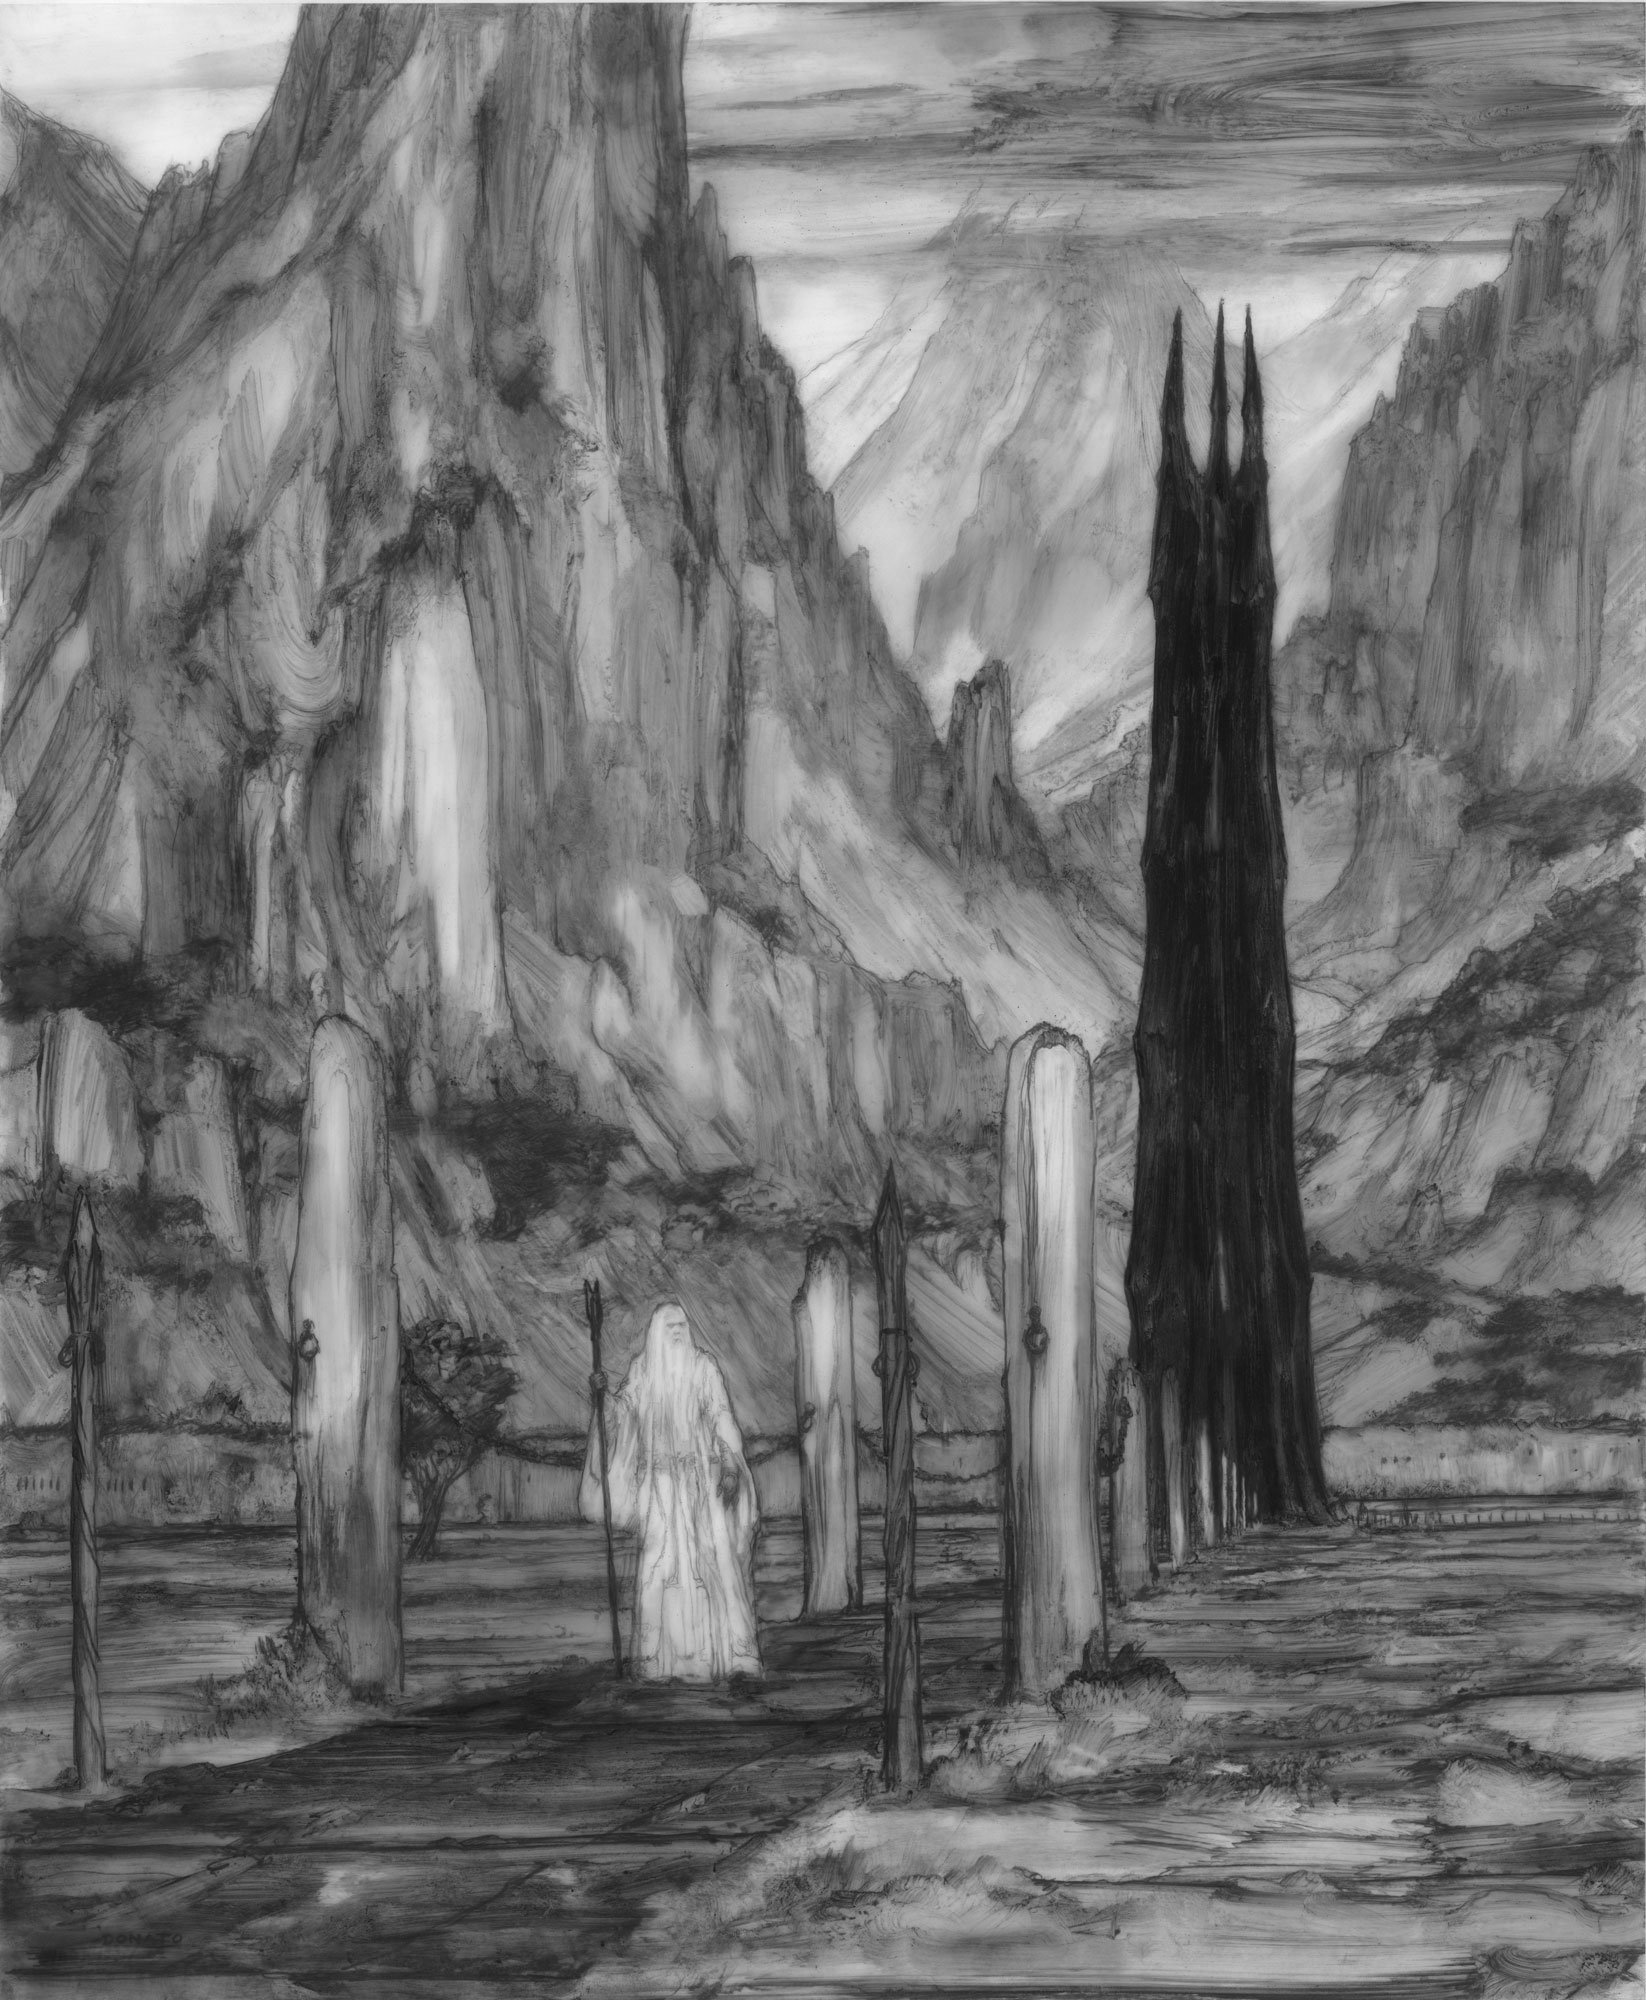 Saruman at Isengard
17" x 14" graphite pencil and paint 2019
private collection